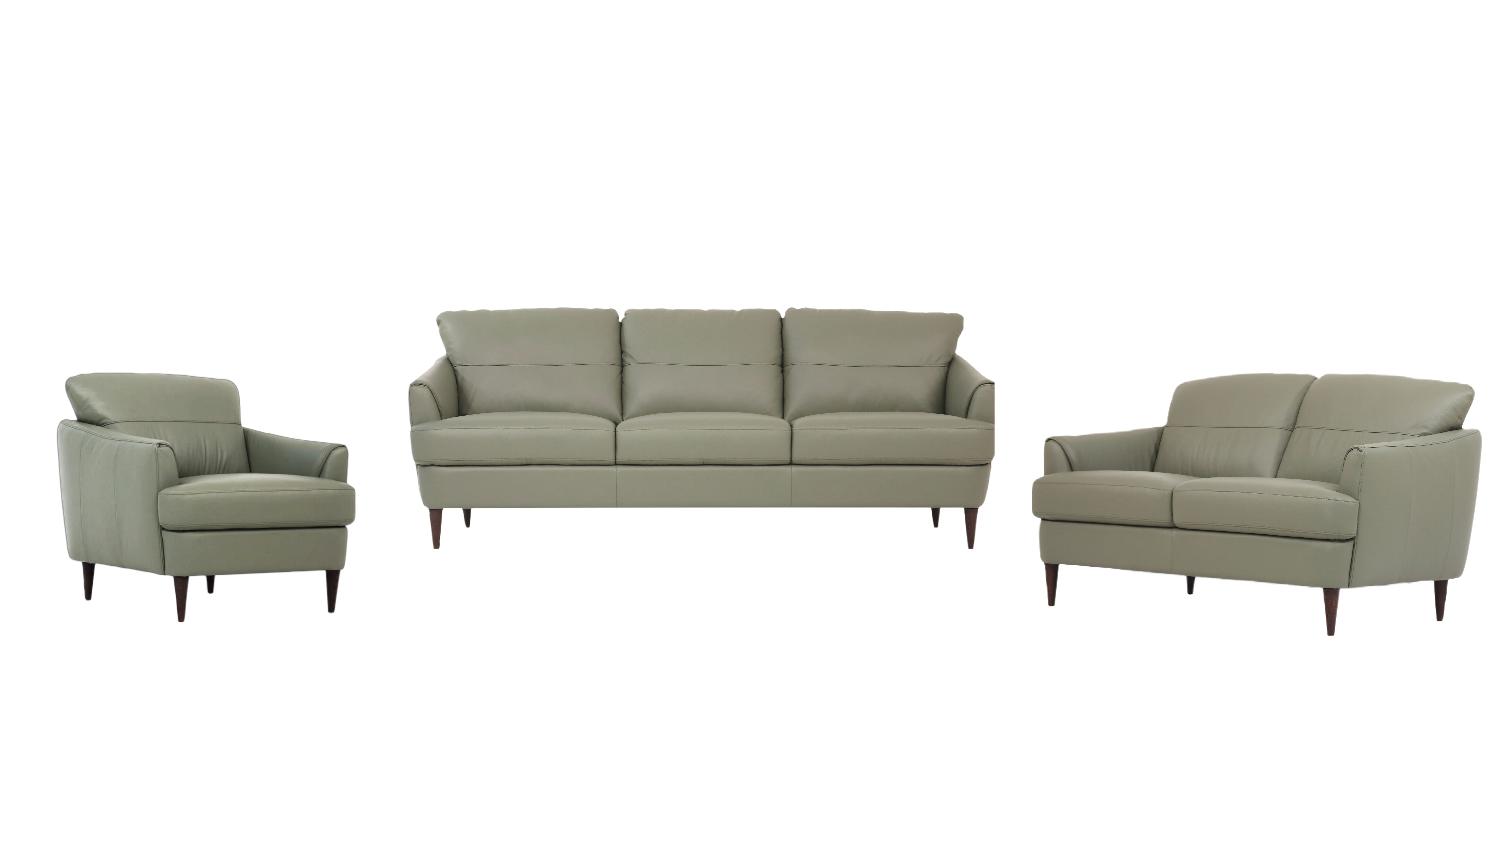 

    
Contemporary Moss Green Leather Sofa + Loveseat + Chair by Acme Helena 54570-3pcs
